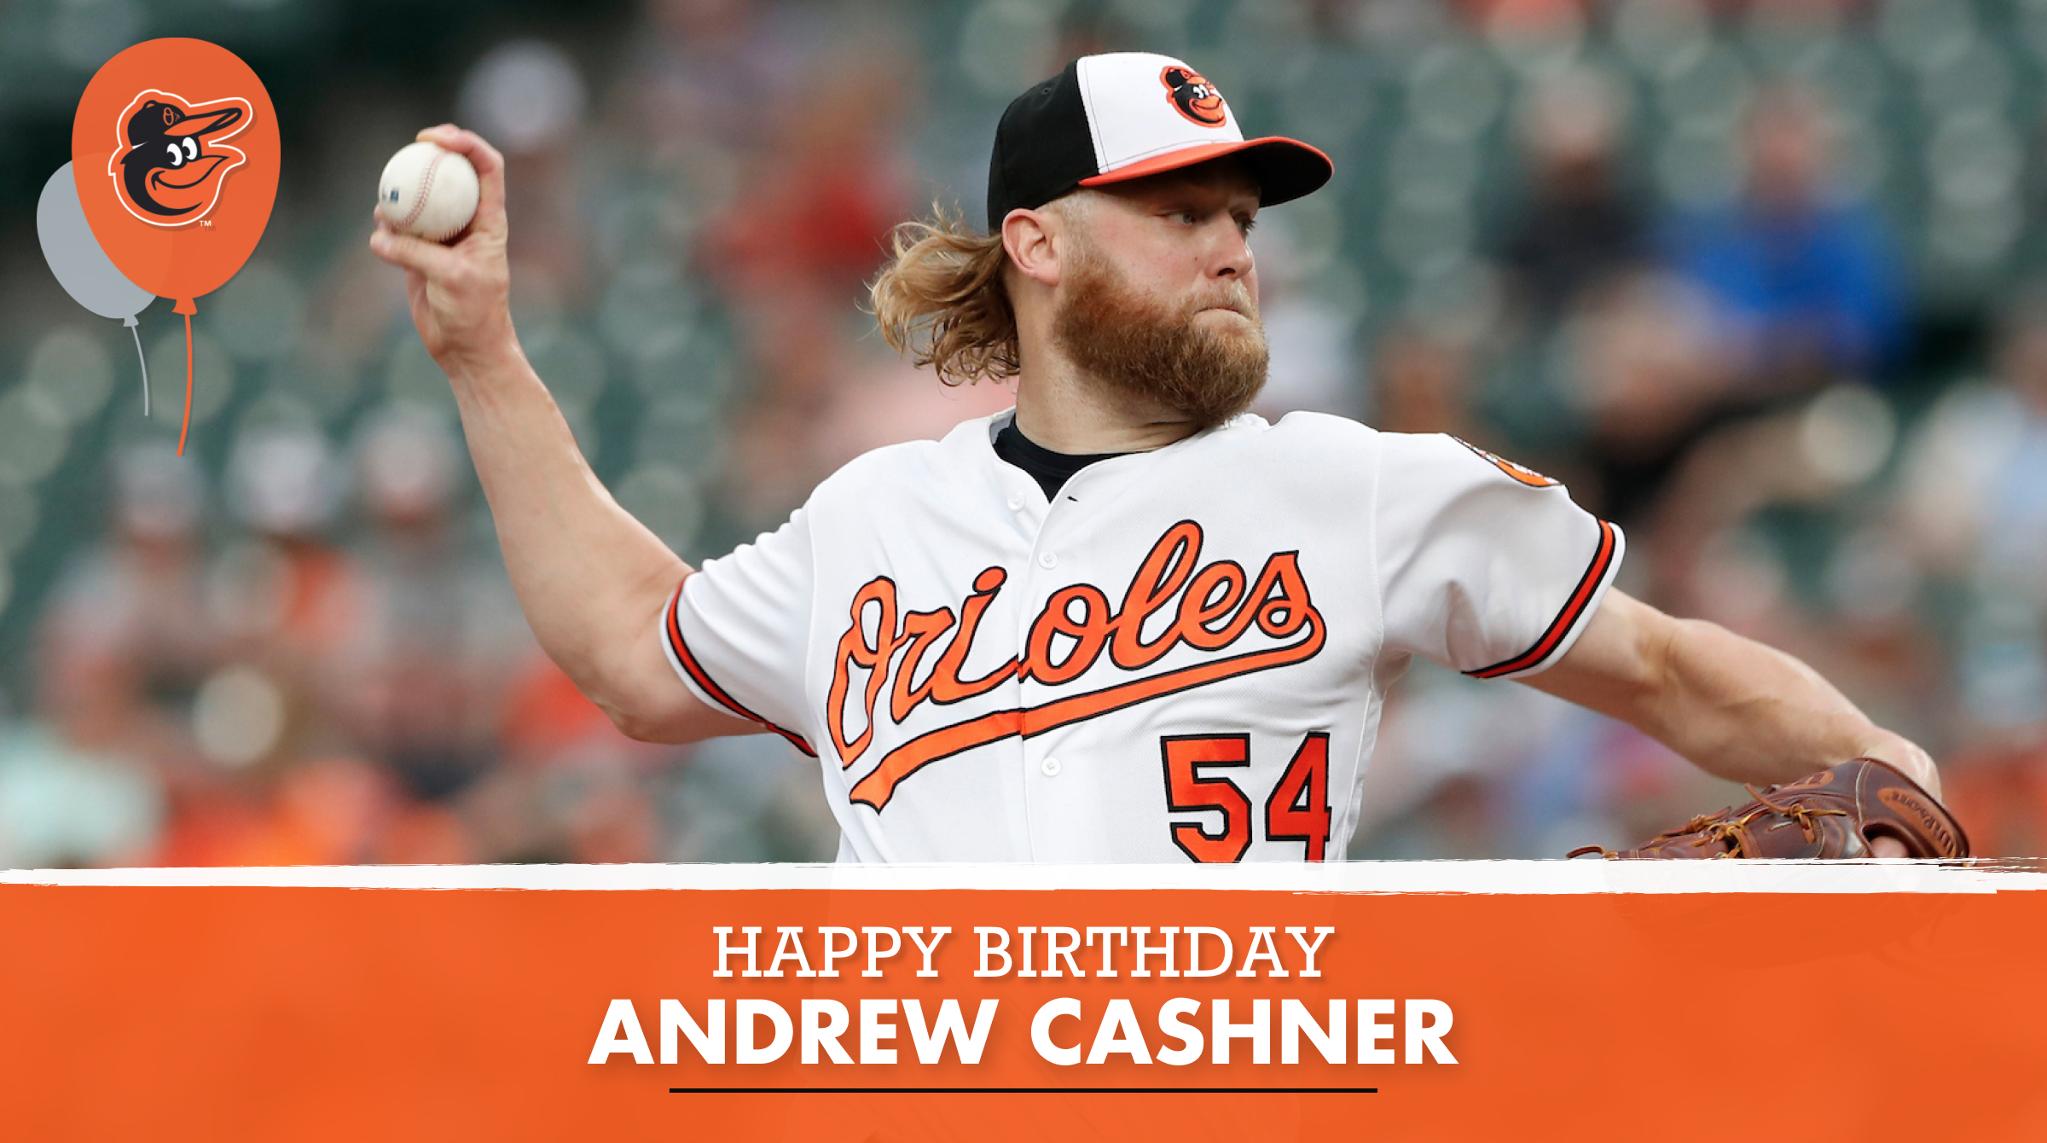 Happy 32nd Birthday to Andrew Cashner! Remessage to wish him a great day. 